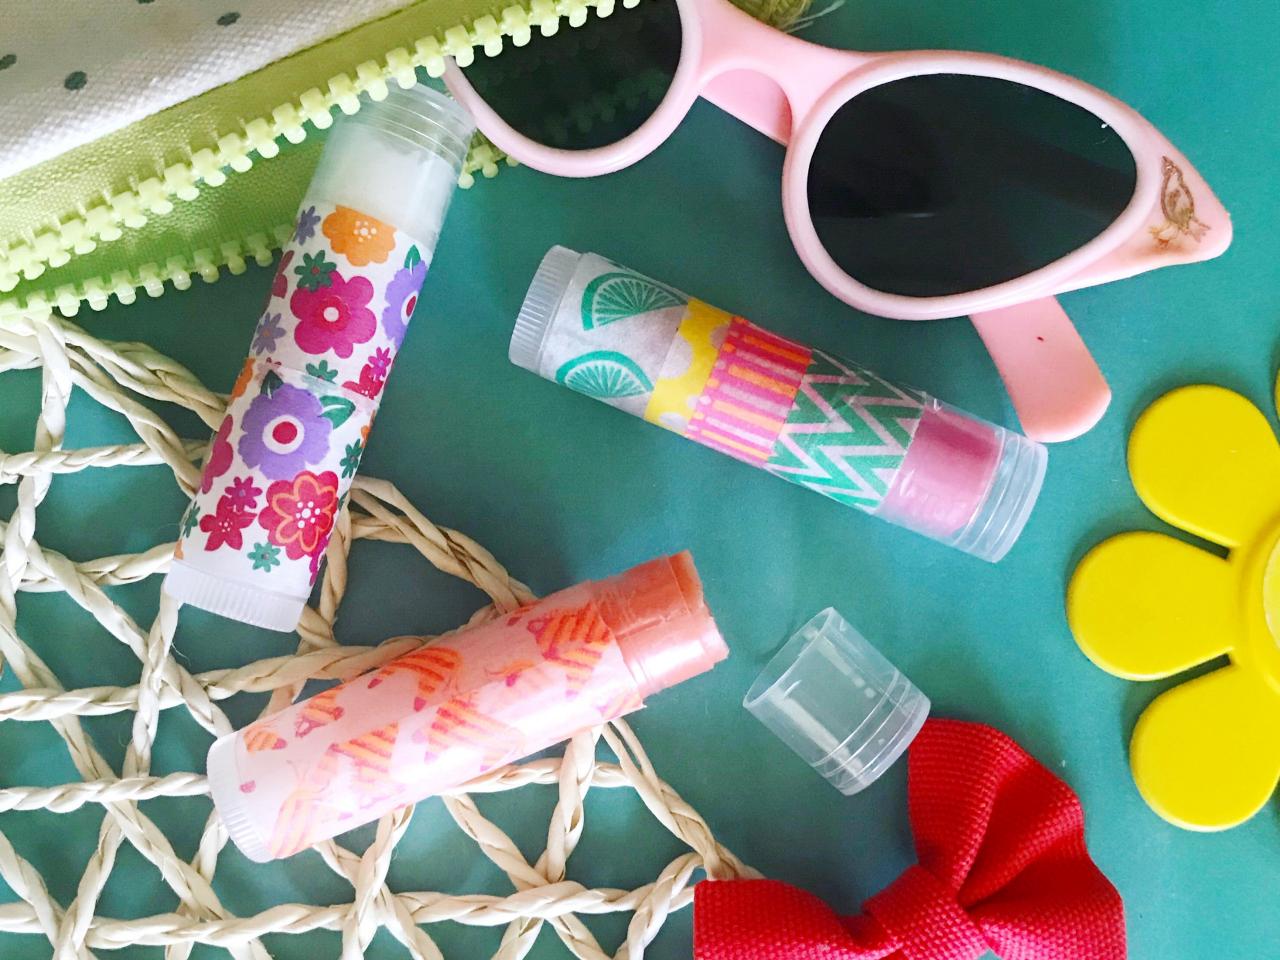 How to Make Flavored Lip Balm With SPF